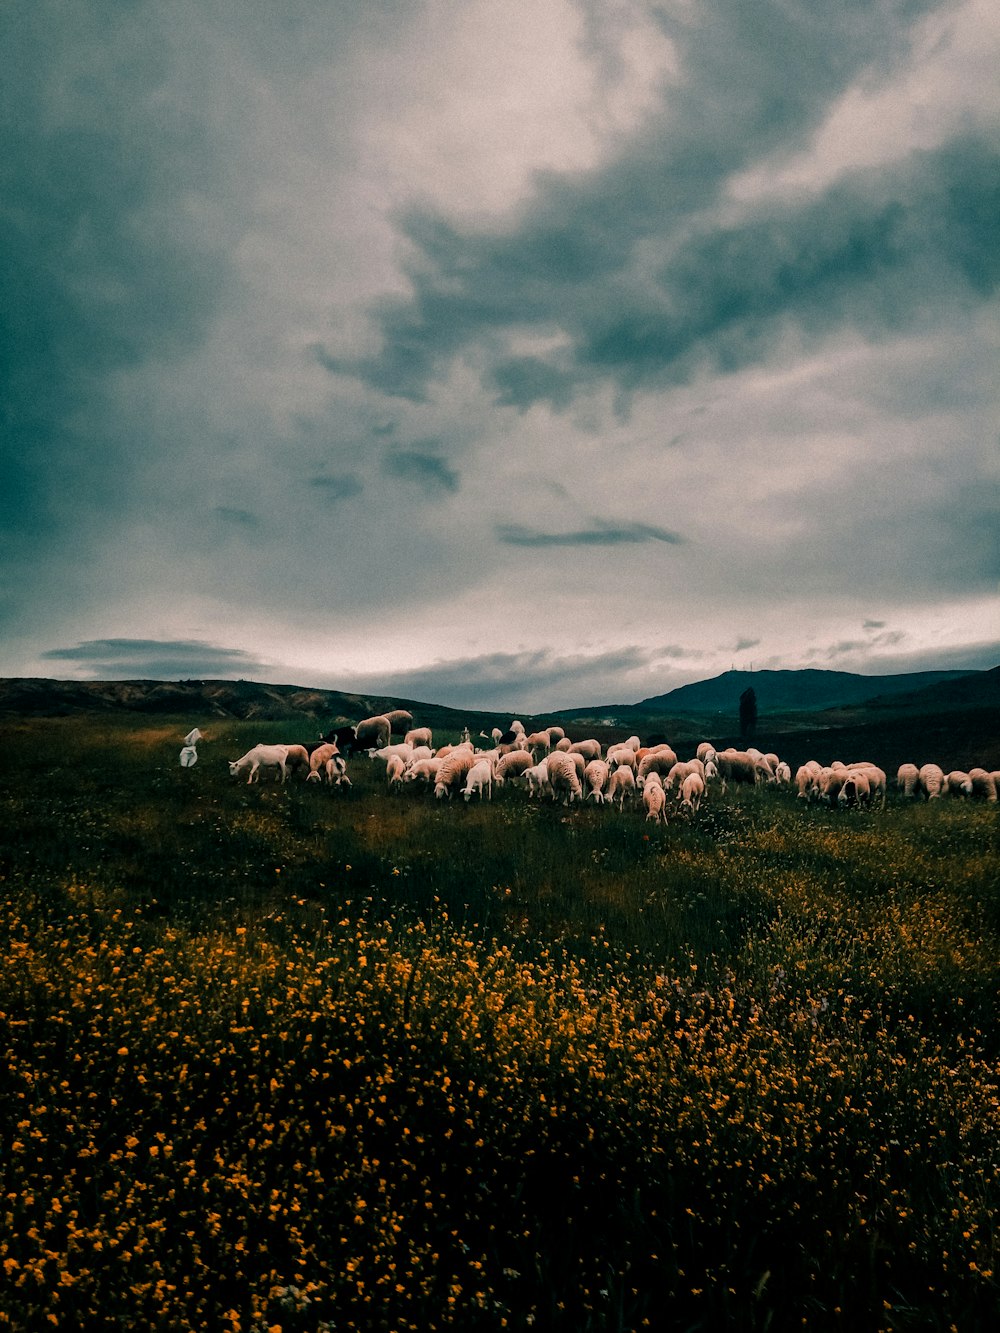 white sheep on green grass field under cloudy sky during daytime